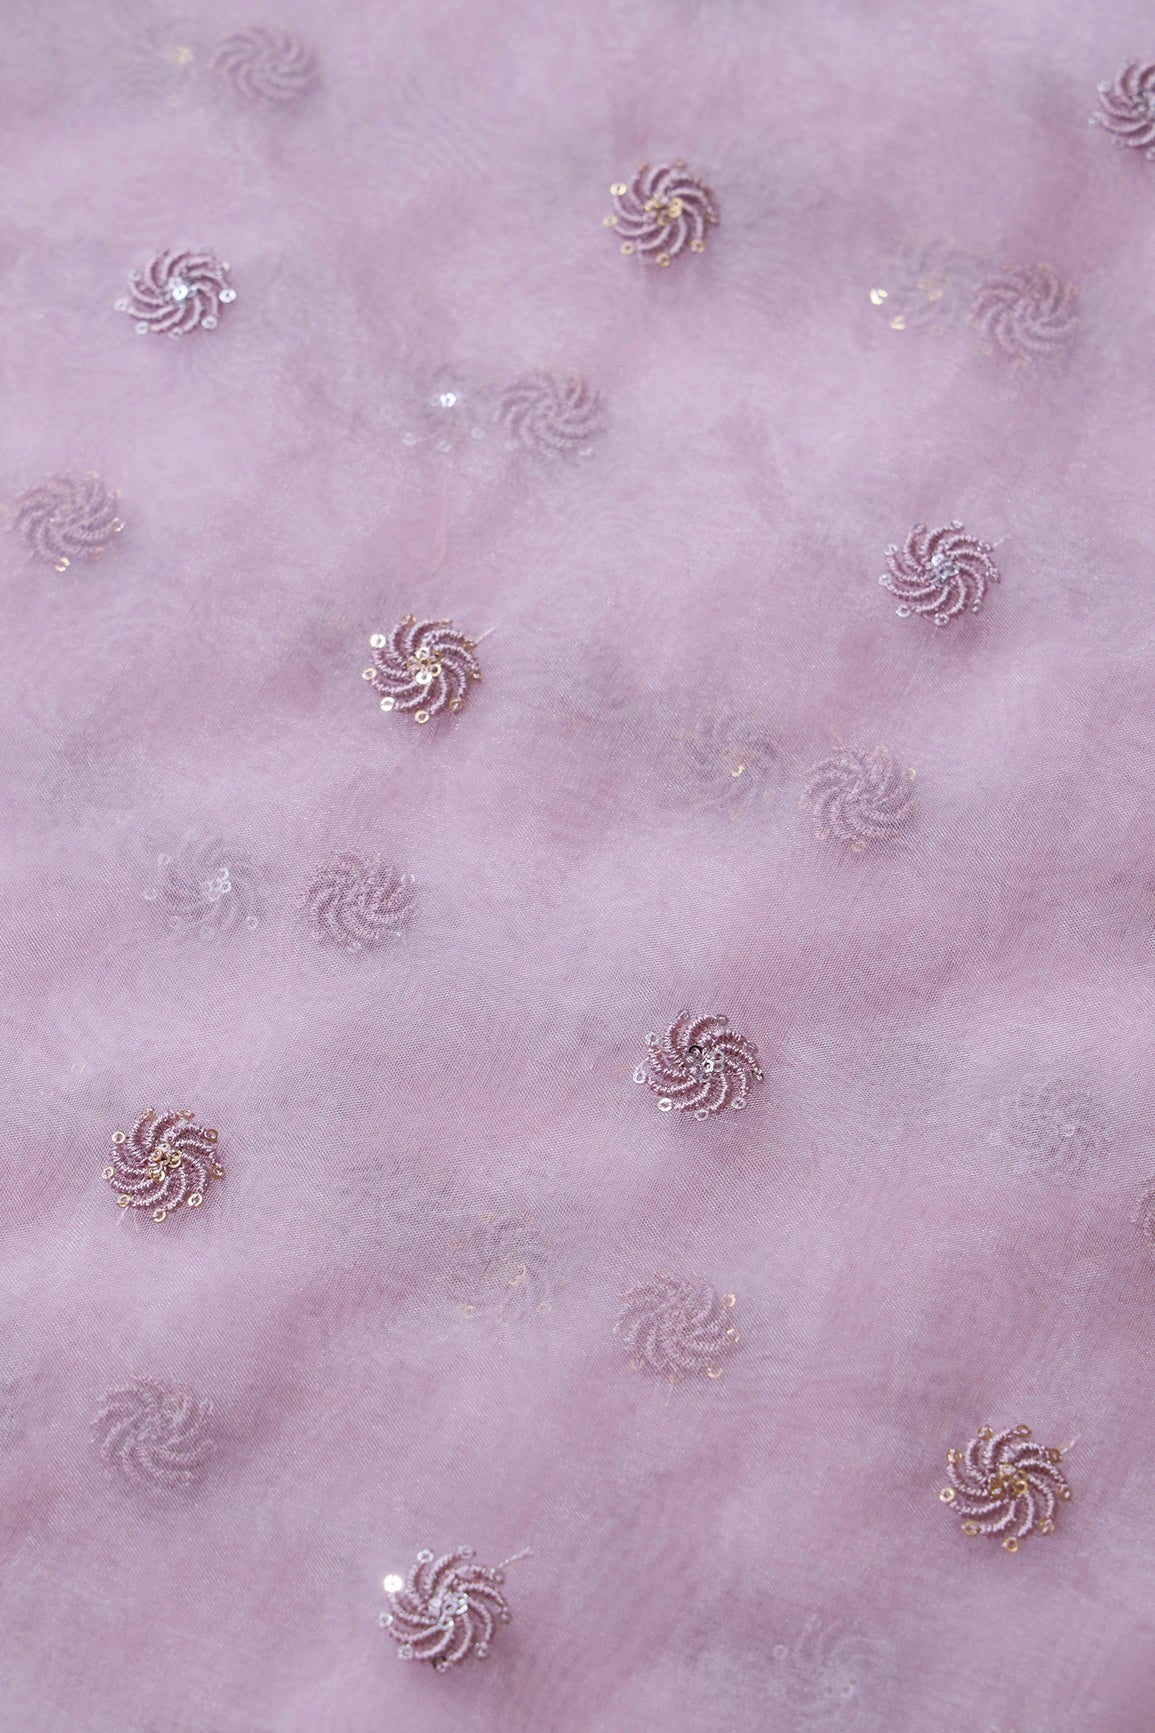 Gold And Silver Sequins Beautiful Small Motif Embroidery Work On Pastel Pink Organza Fabric